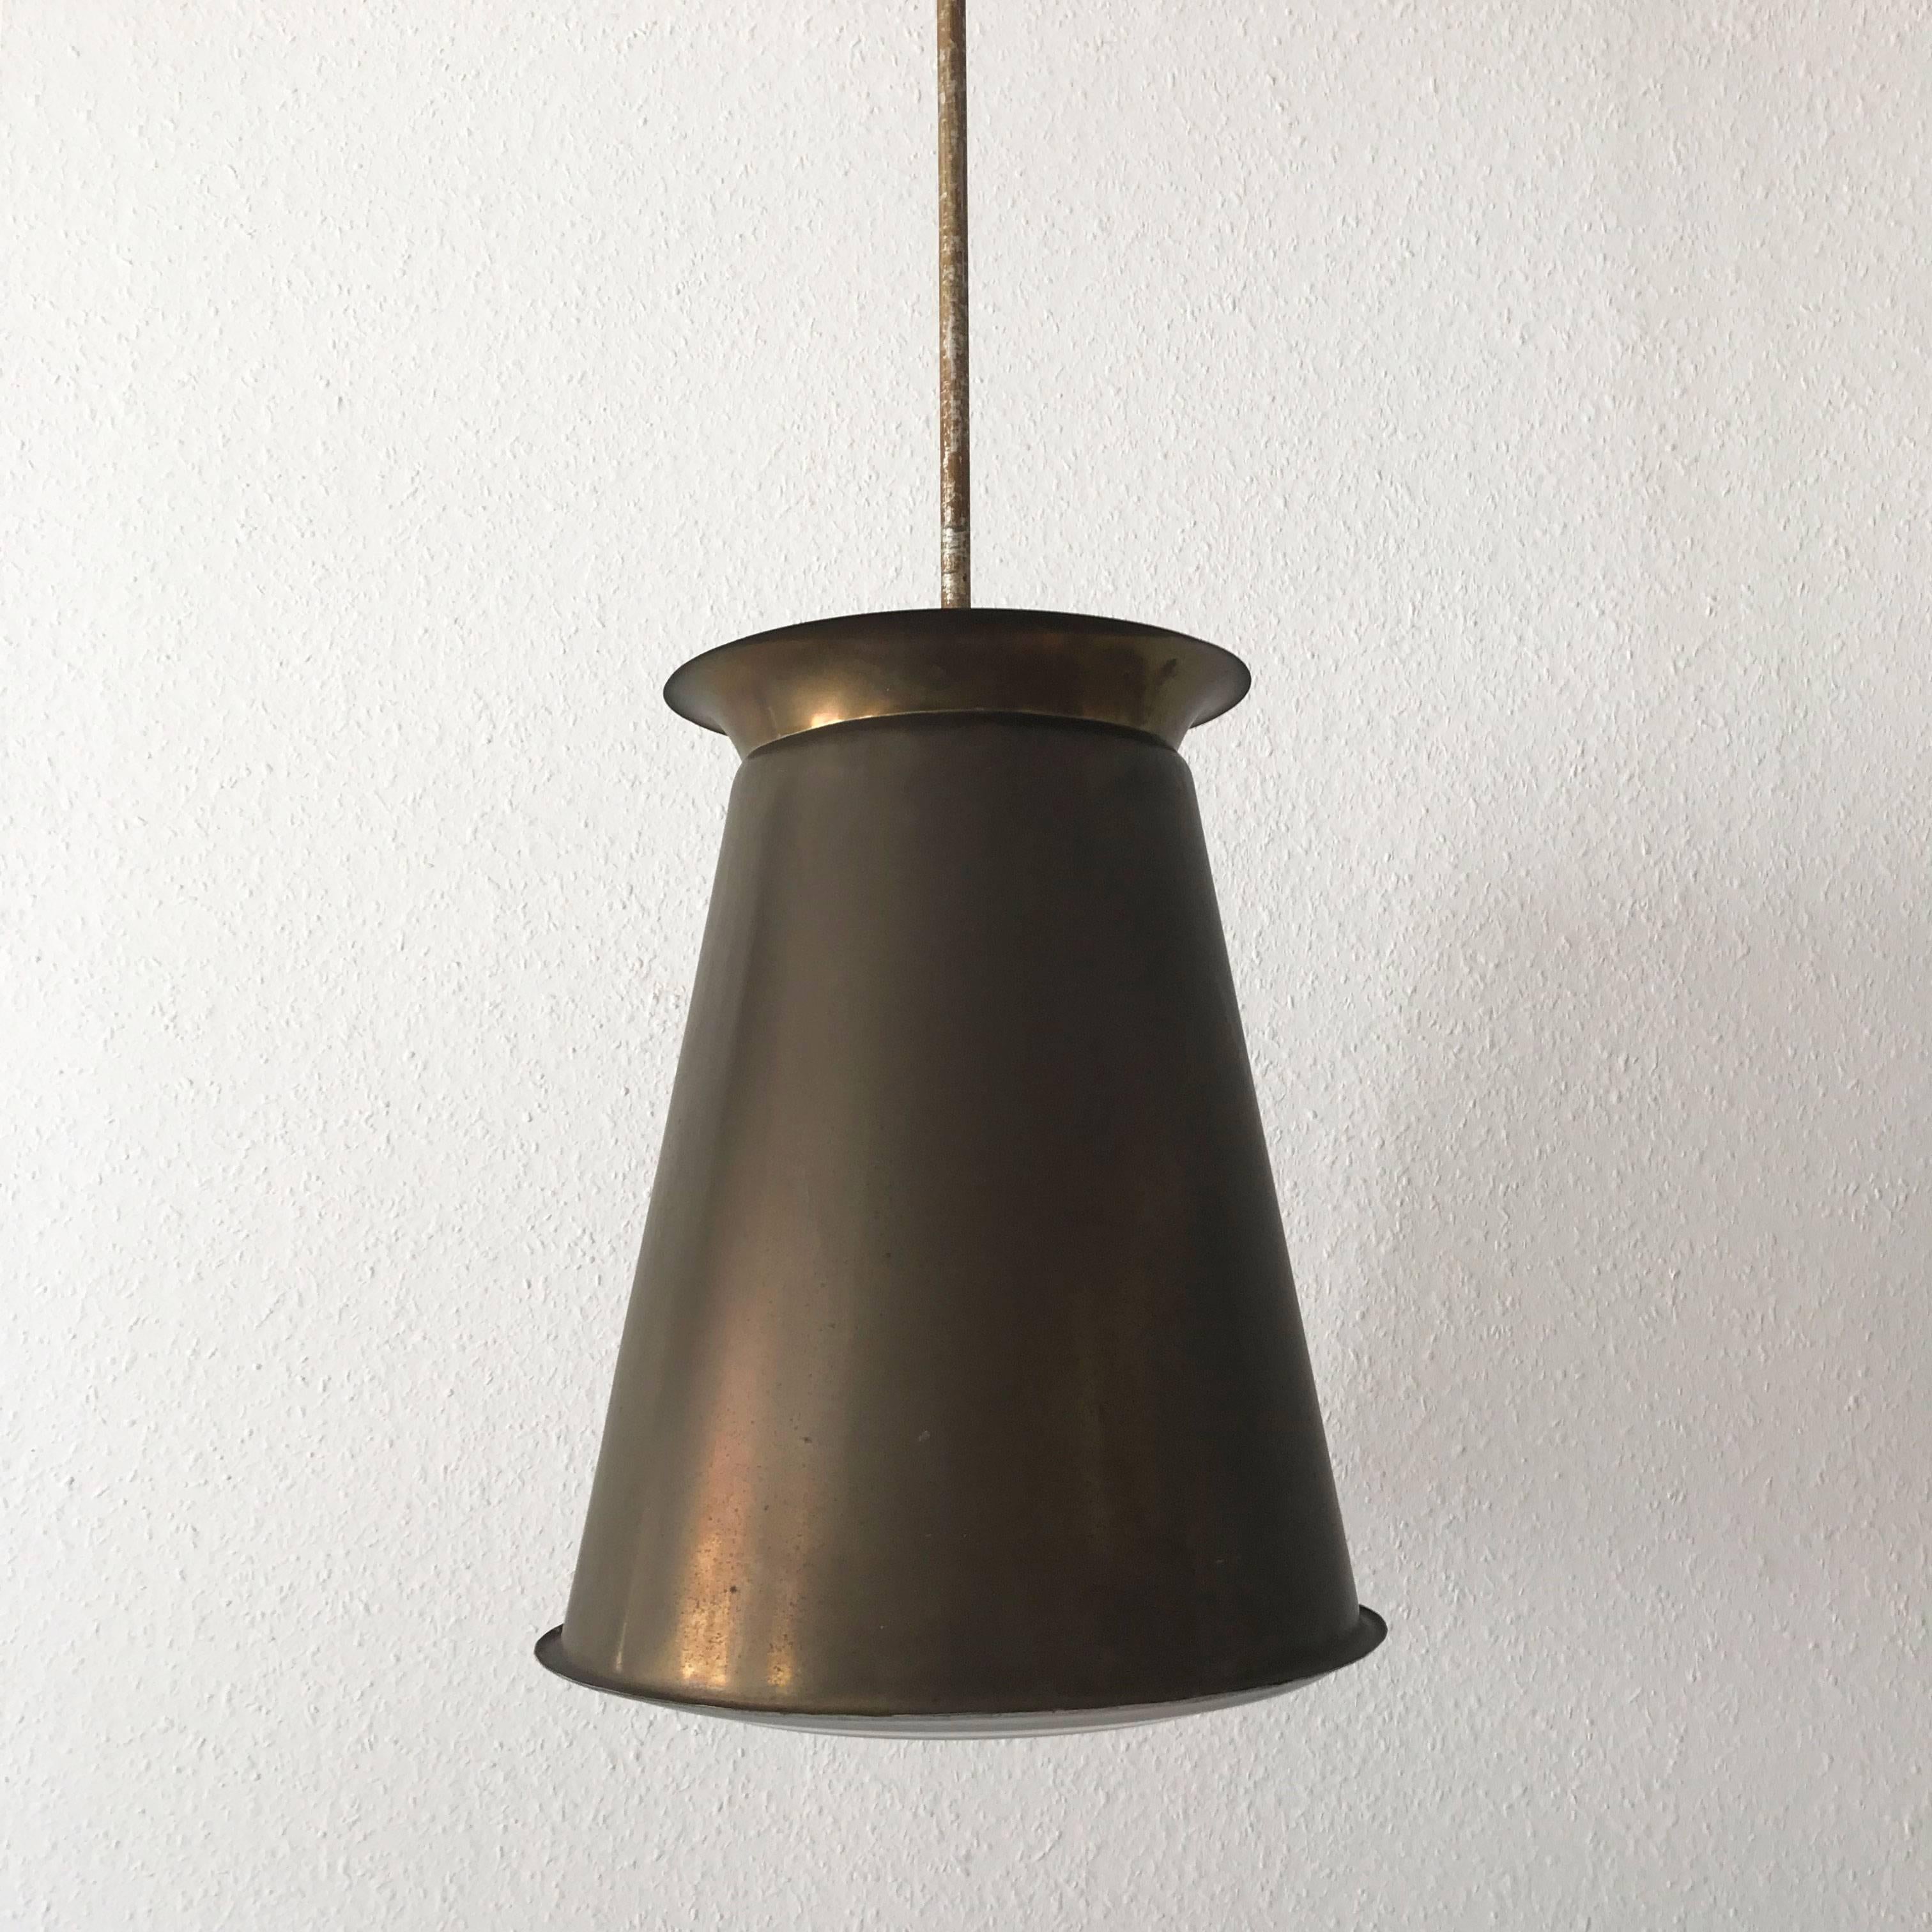 Early 20th Century Exceptional Bauhaus Pendant Lamp by Adolf Meyer for Zeiss Ikon, 1930s, Germany For Sale